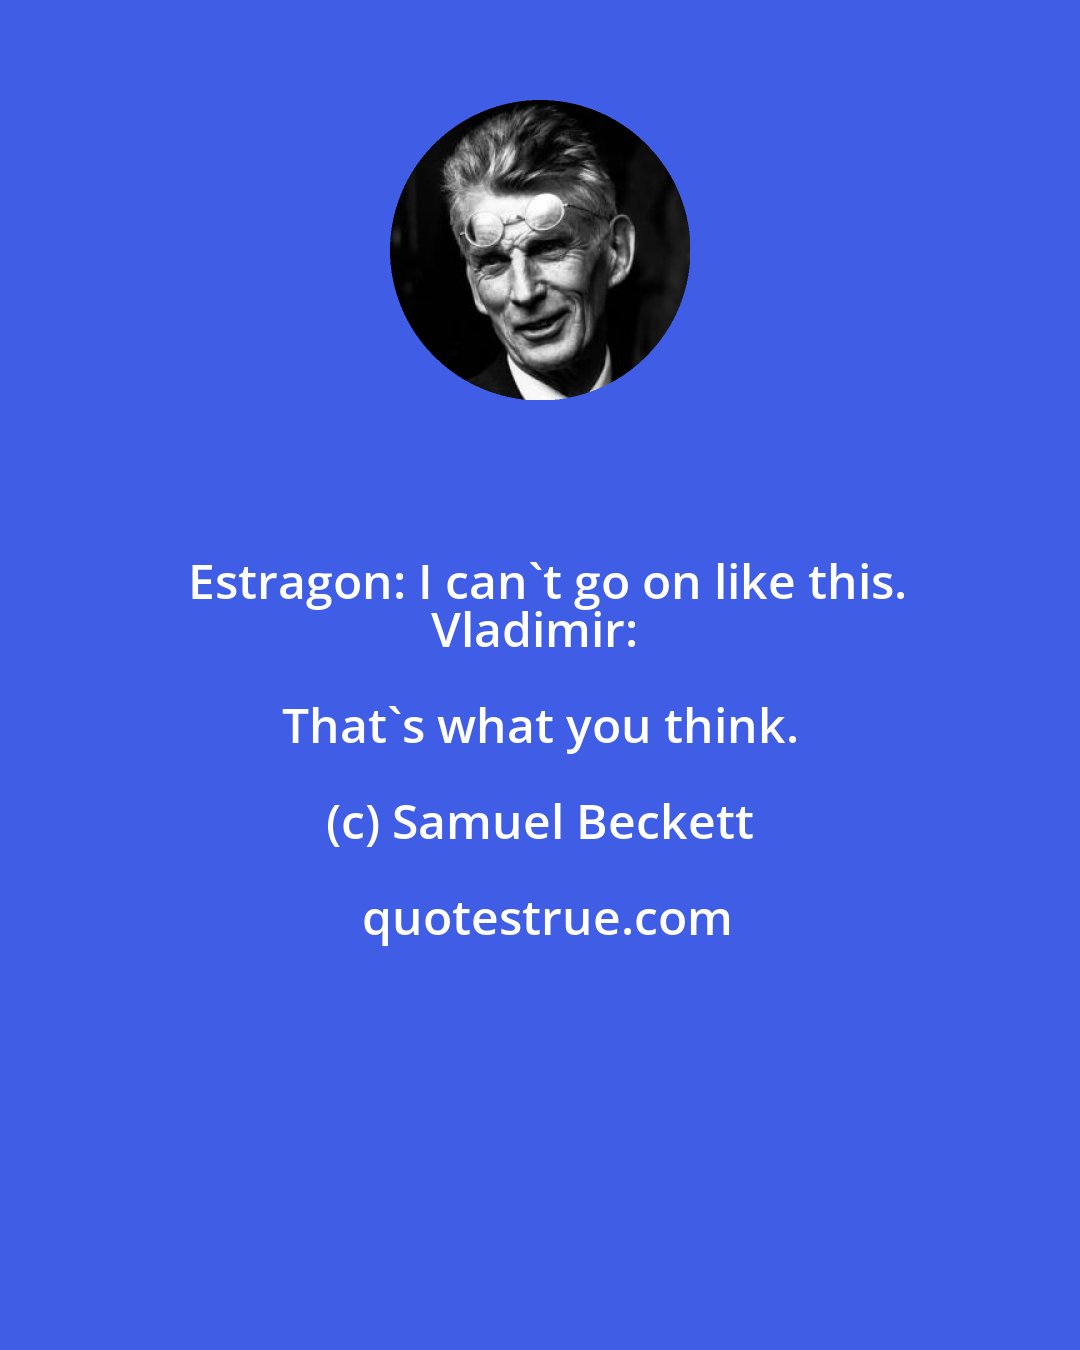 Samuel Beckett: Estragon: I can't go on like this.
Vladimir: That's what you think.